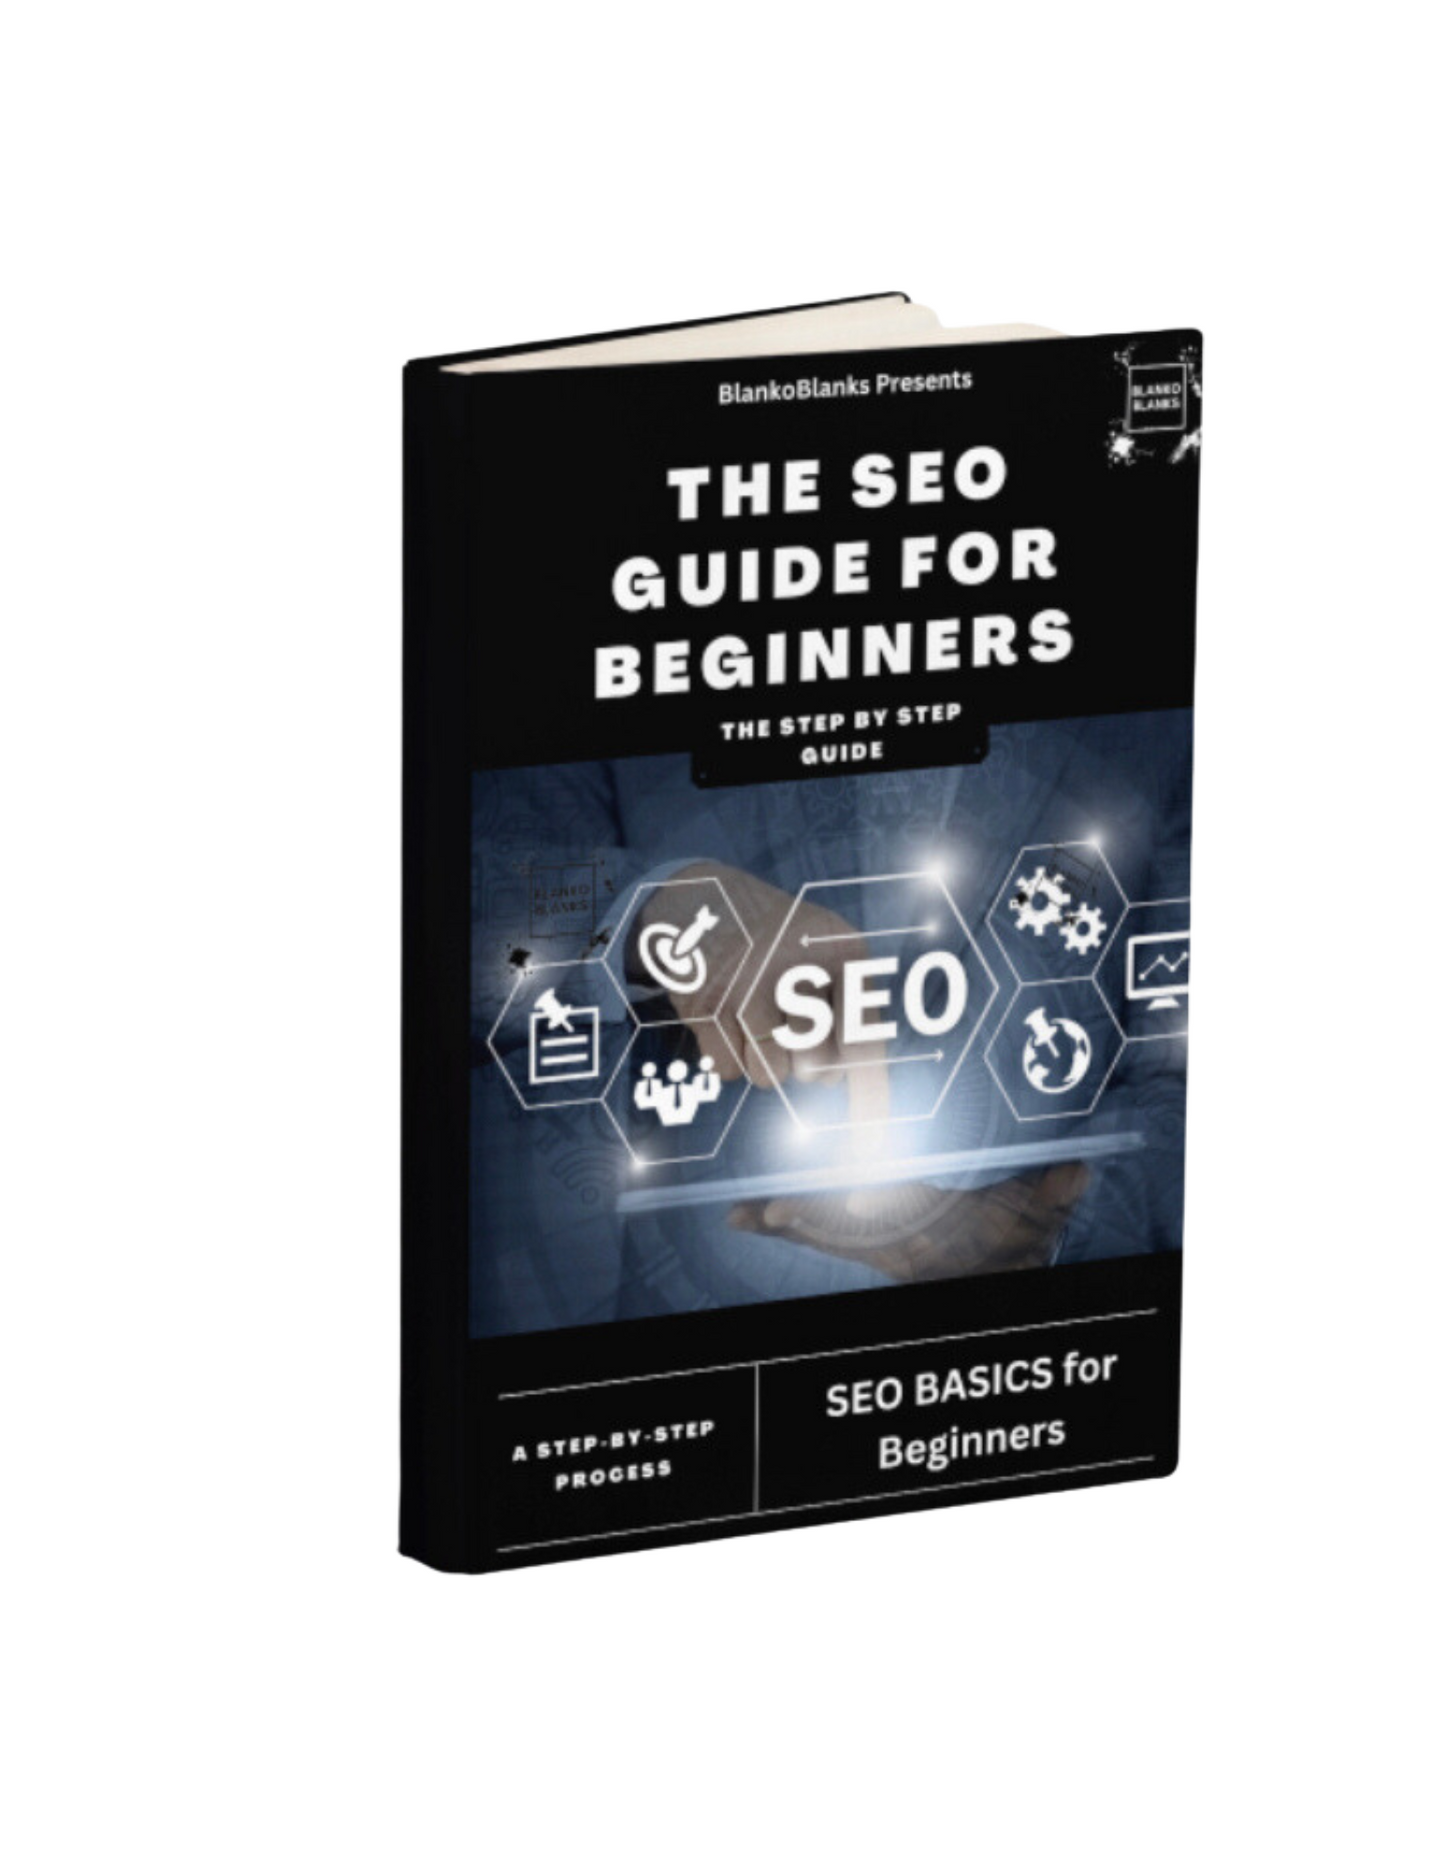 The SEO Guide for Beginners